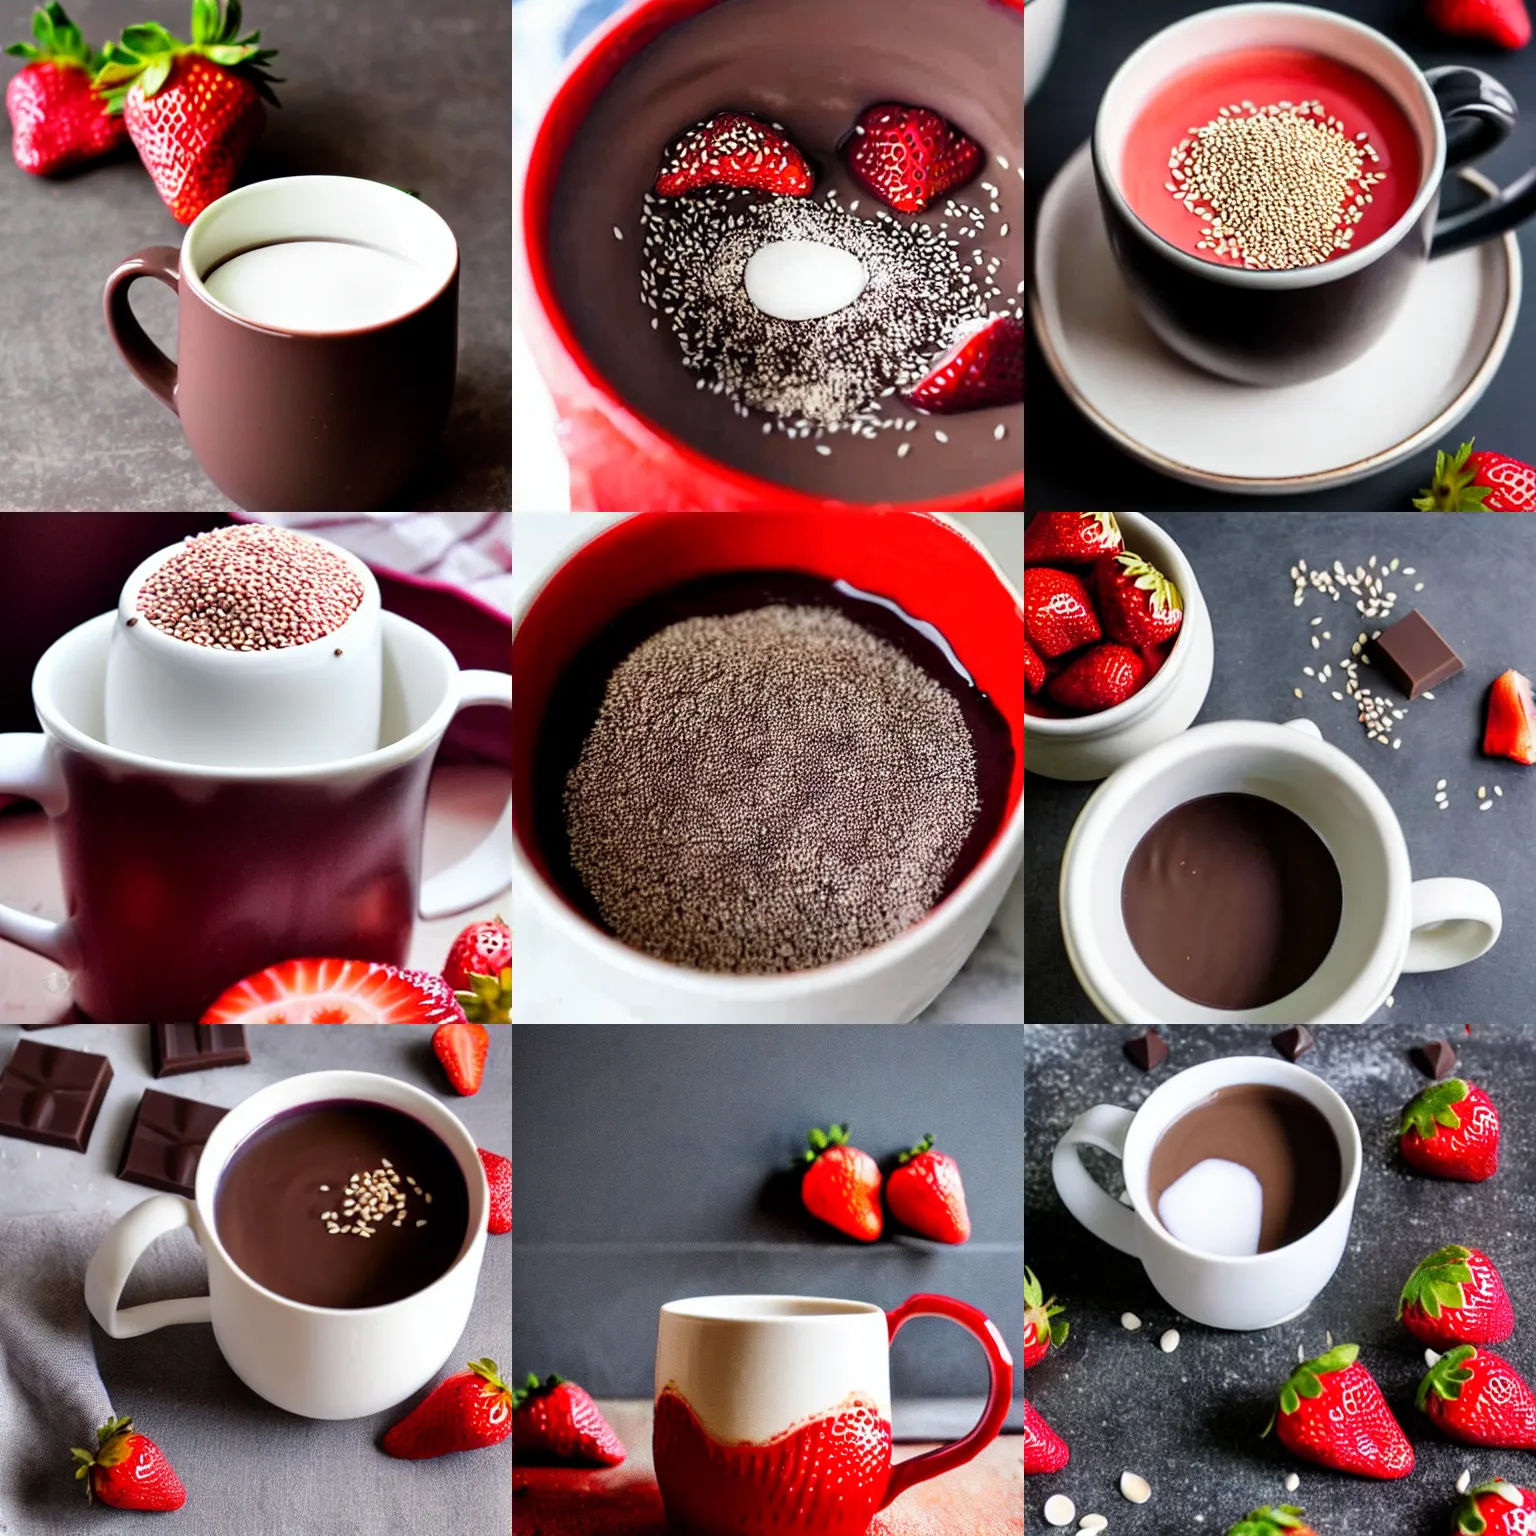 Prompt: A strawberry mug filled with white sesame seeds. The mug is floating in a dark chocolate sea.